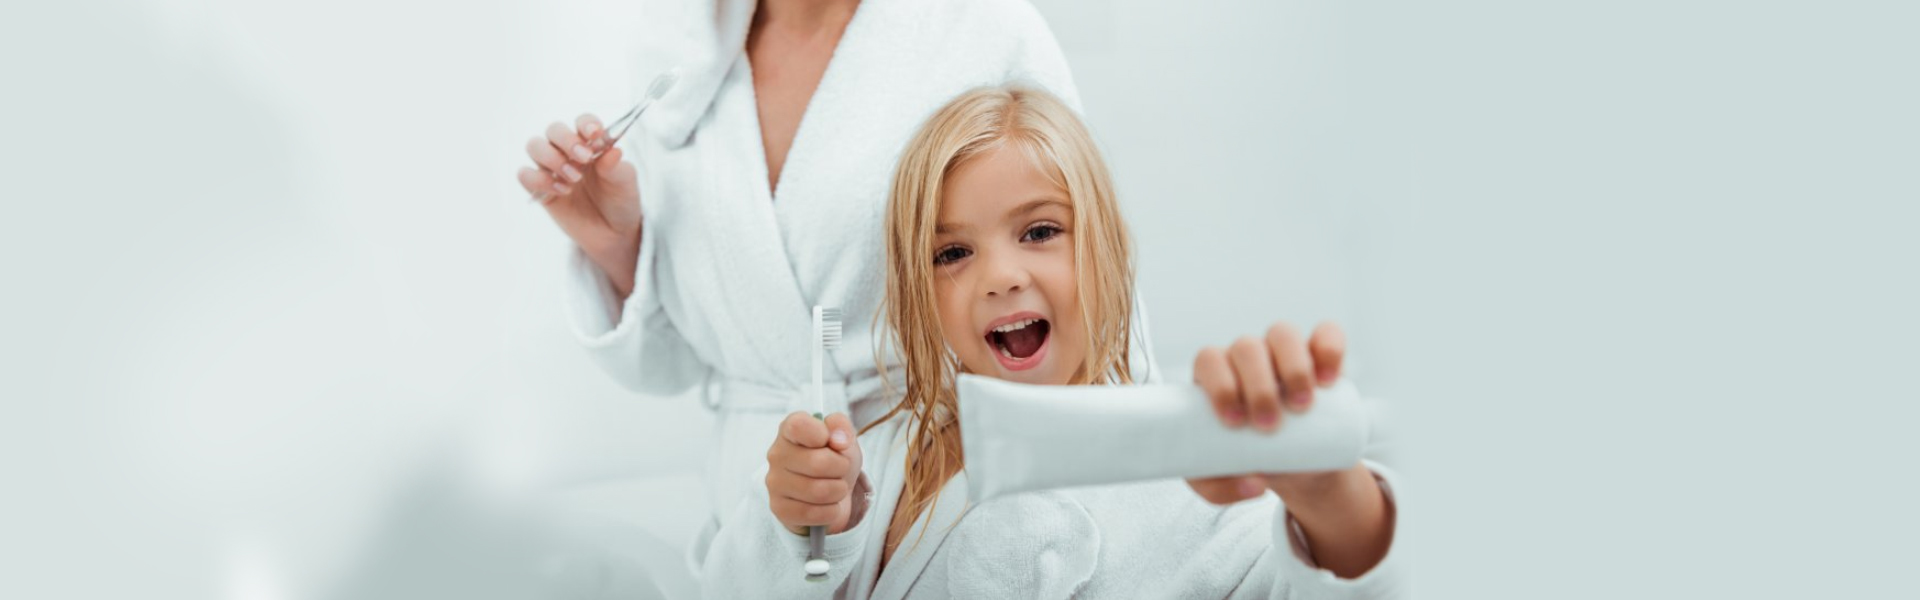 Pediatric Dentists Vs. Family Dentists: Know the Difference